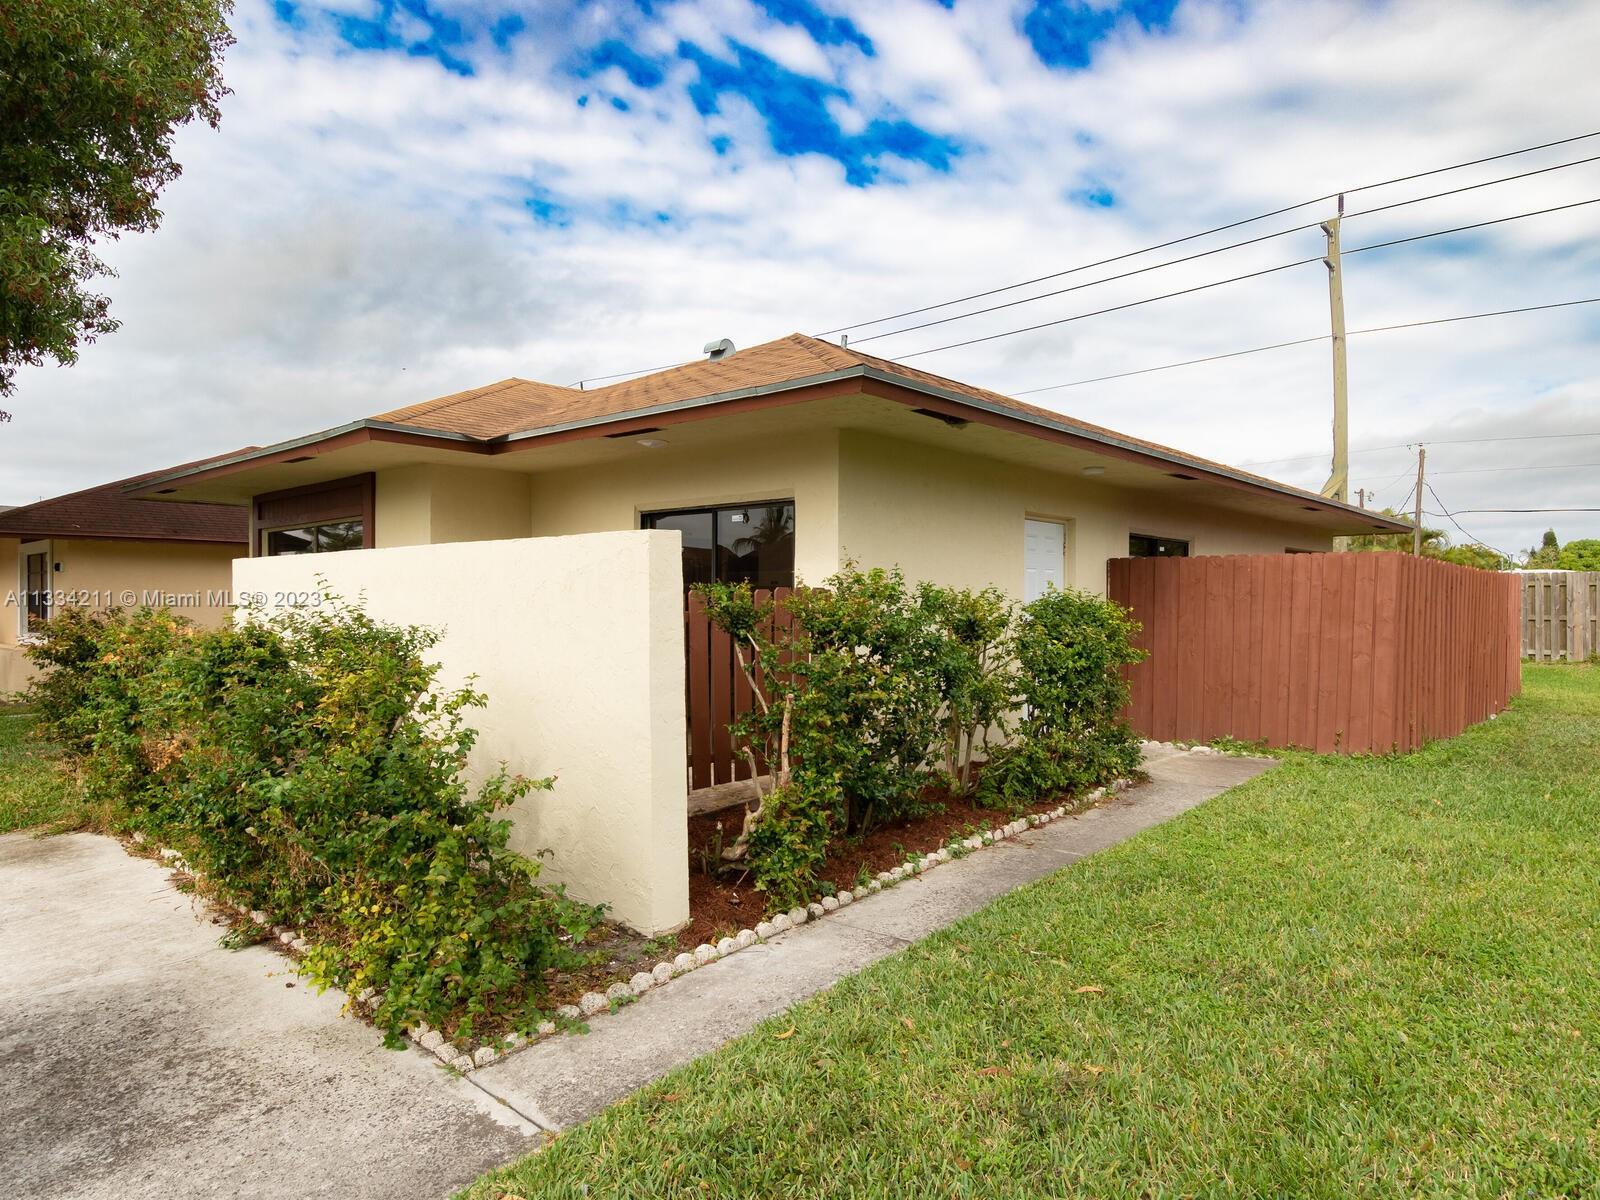 Completely remodeled home in the quiet community of Palm Hill.  New kitchen, floors, baths, A/C and 